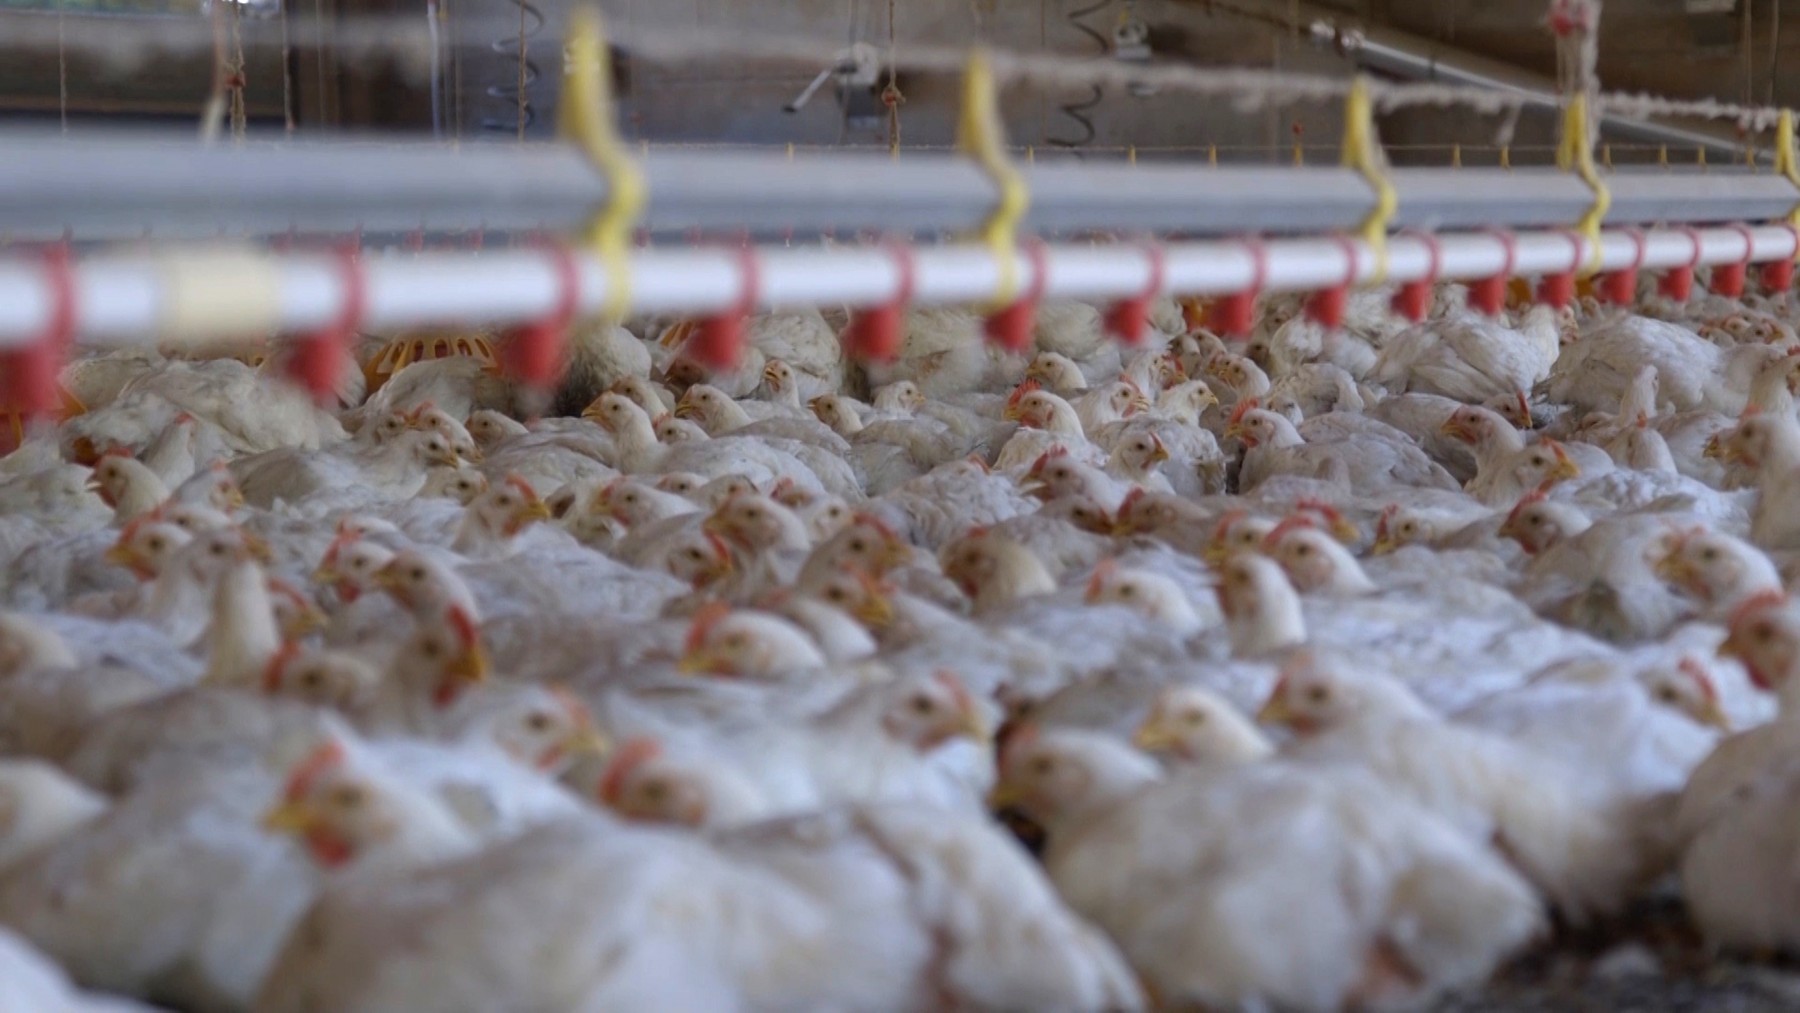 Chickens crowded in an intensive factory farm system.